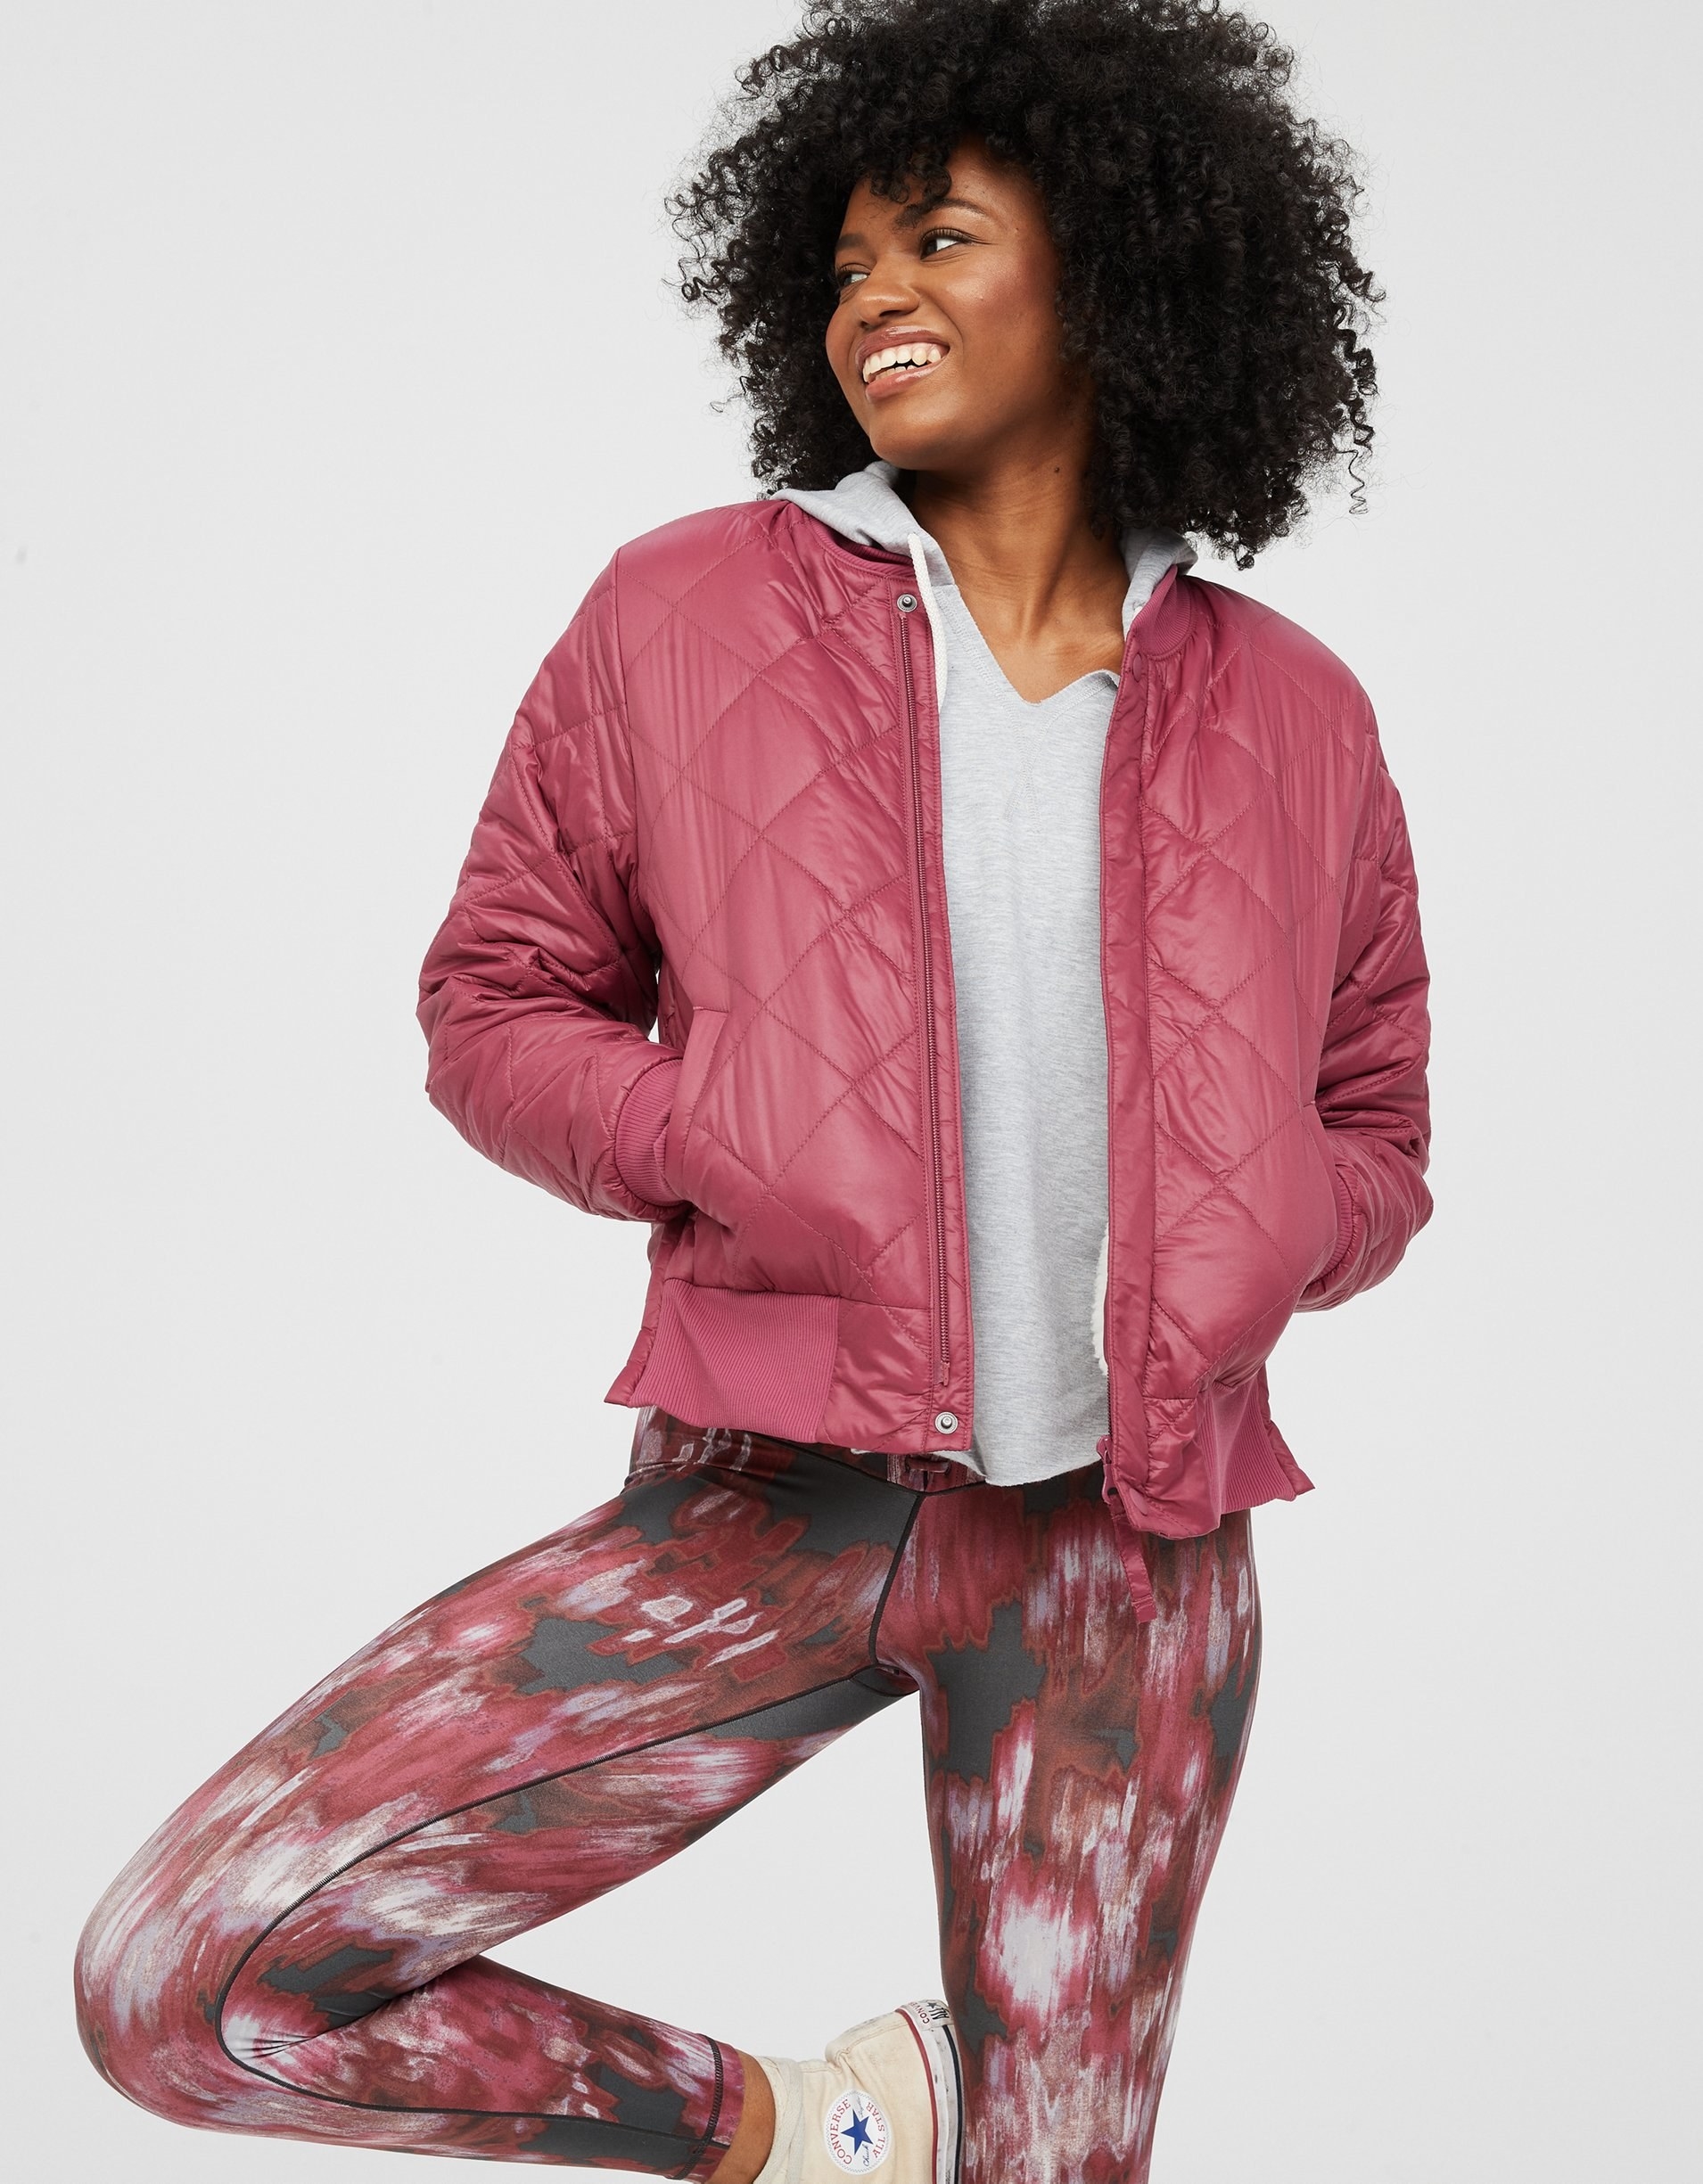 model in the pink bomber jacket with pockets